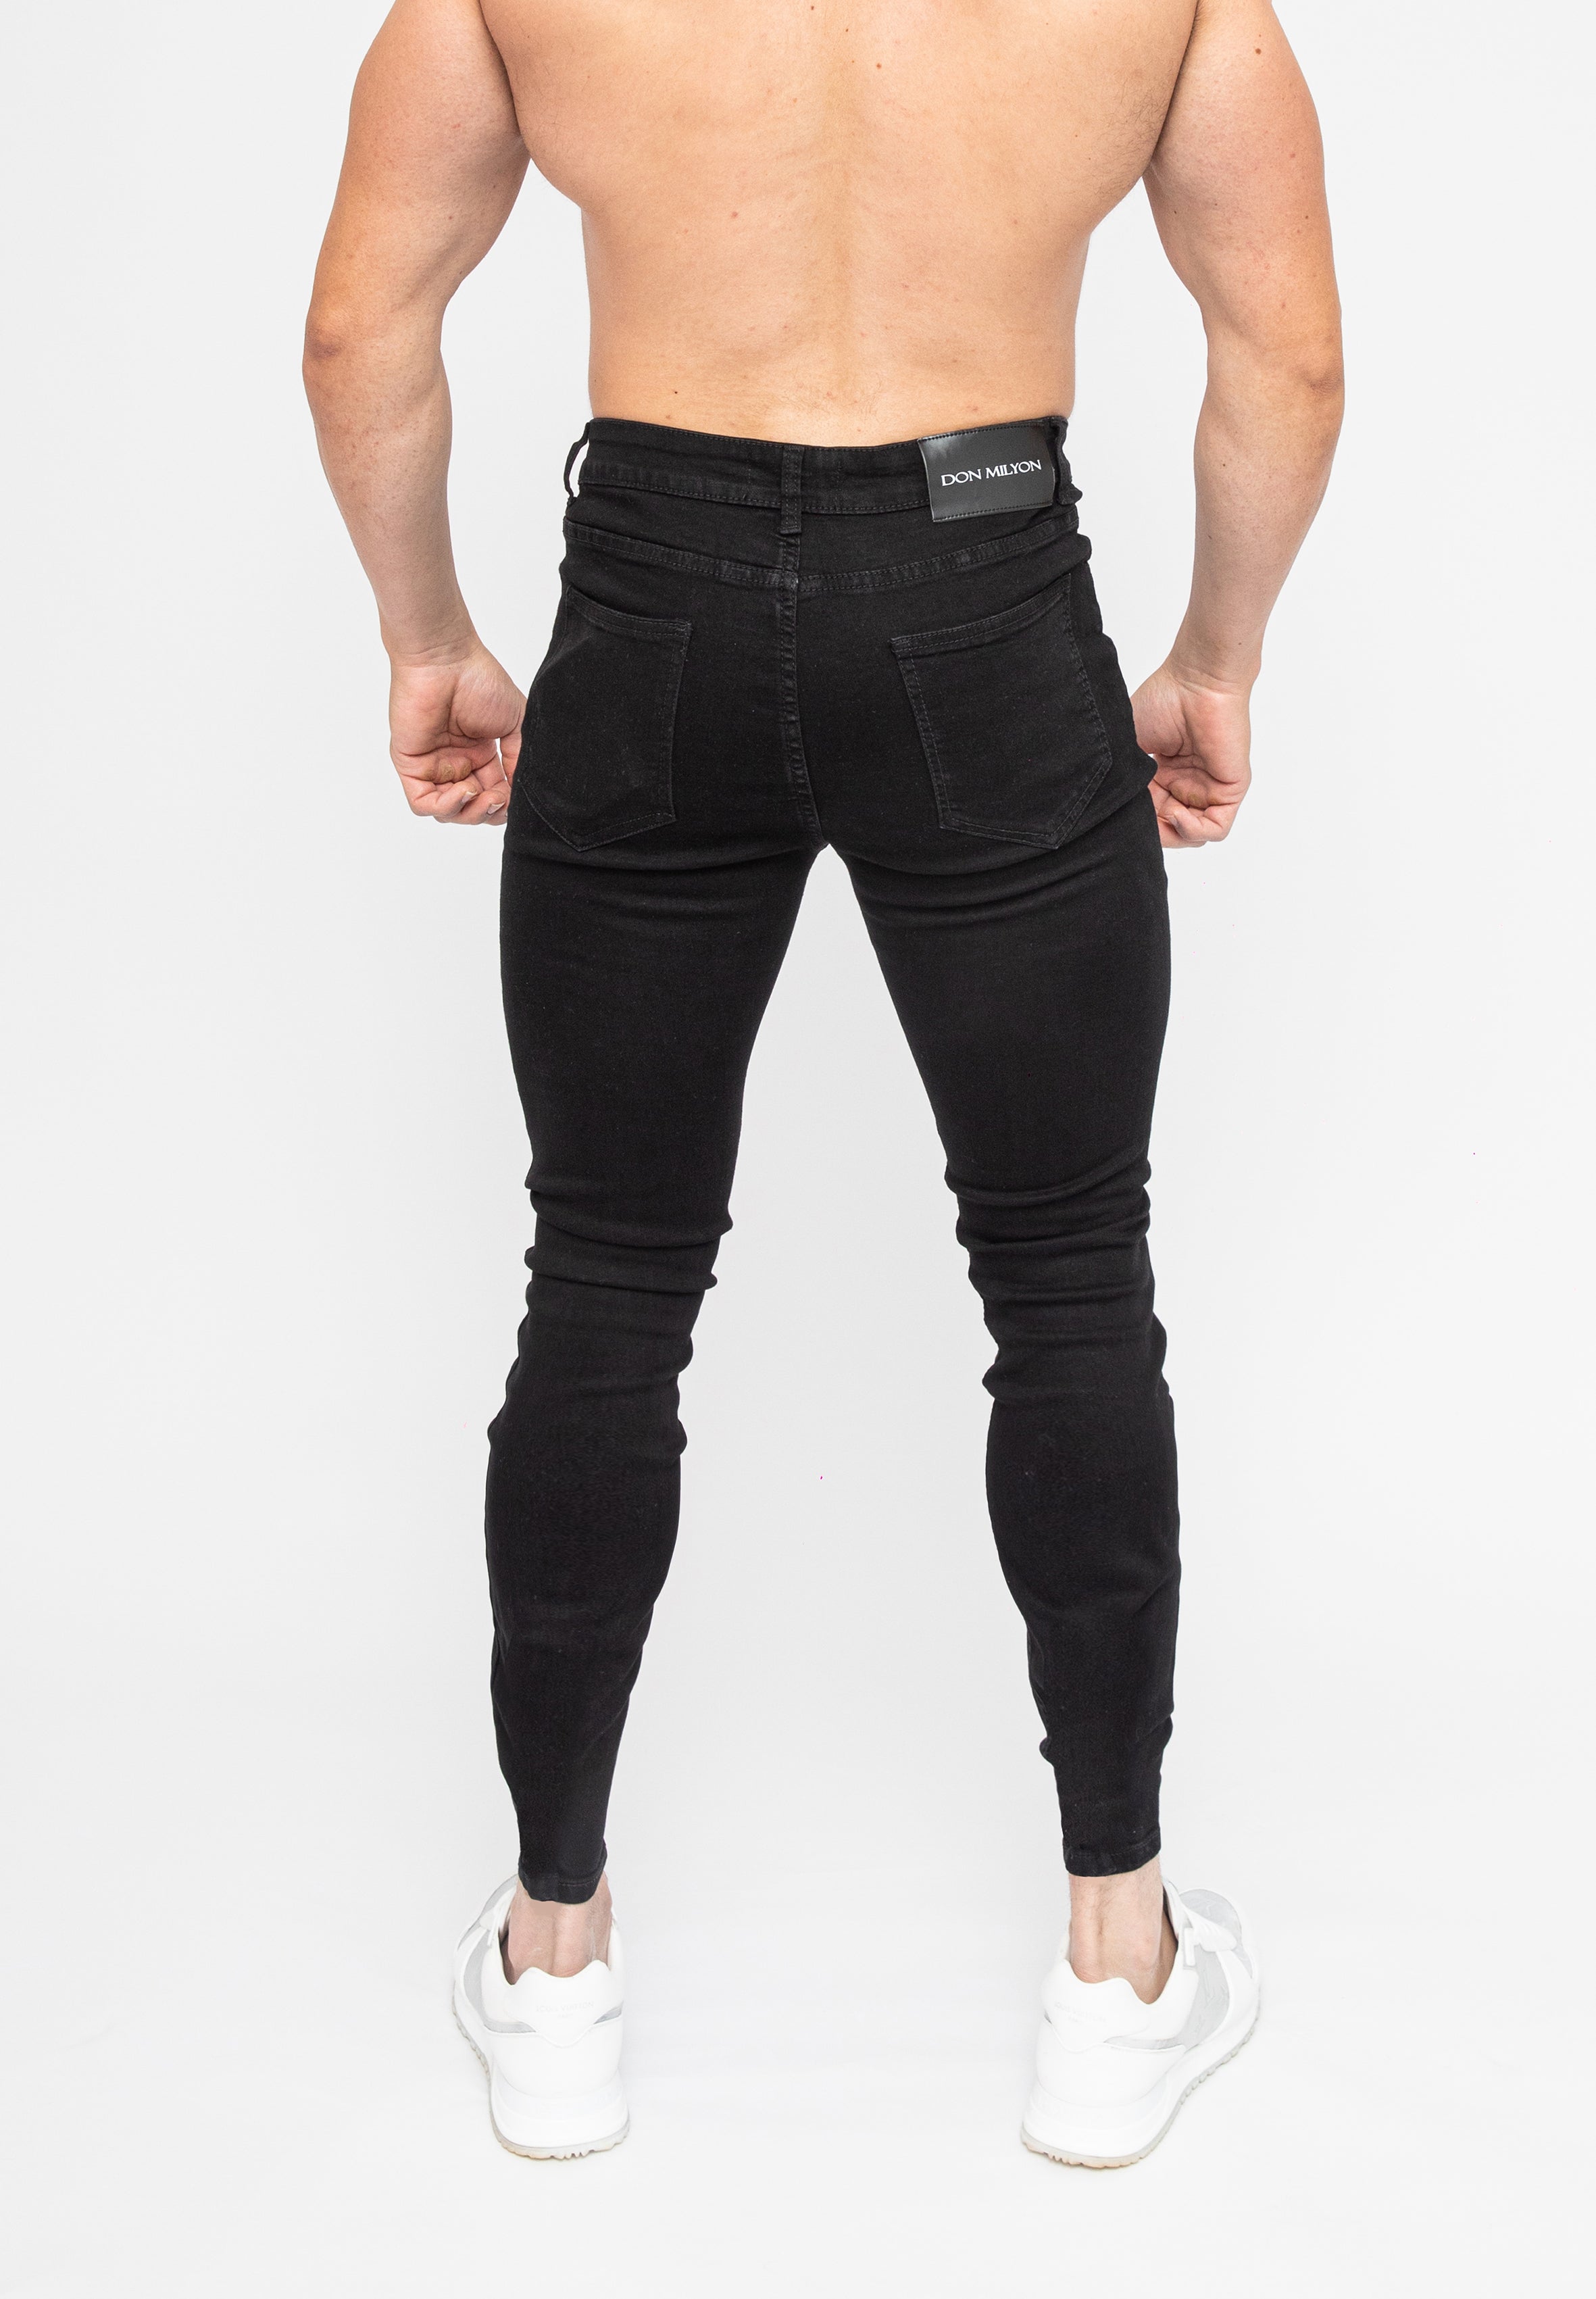 Holloyiver Mens Ripped Jeans Black Stacked Jeans Slim Fit Ripped Jeans  Destroyed Straight Denim Pants Trouser Streetwear For Dark Blue,4XL -  Walmart.com